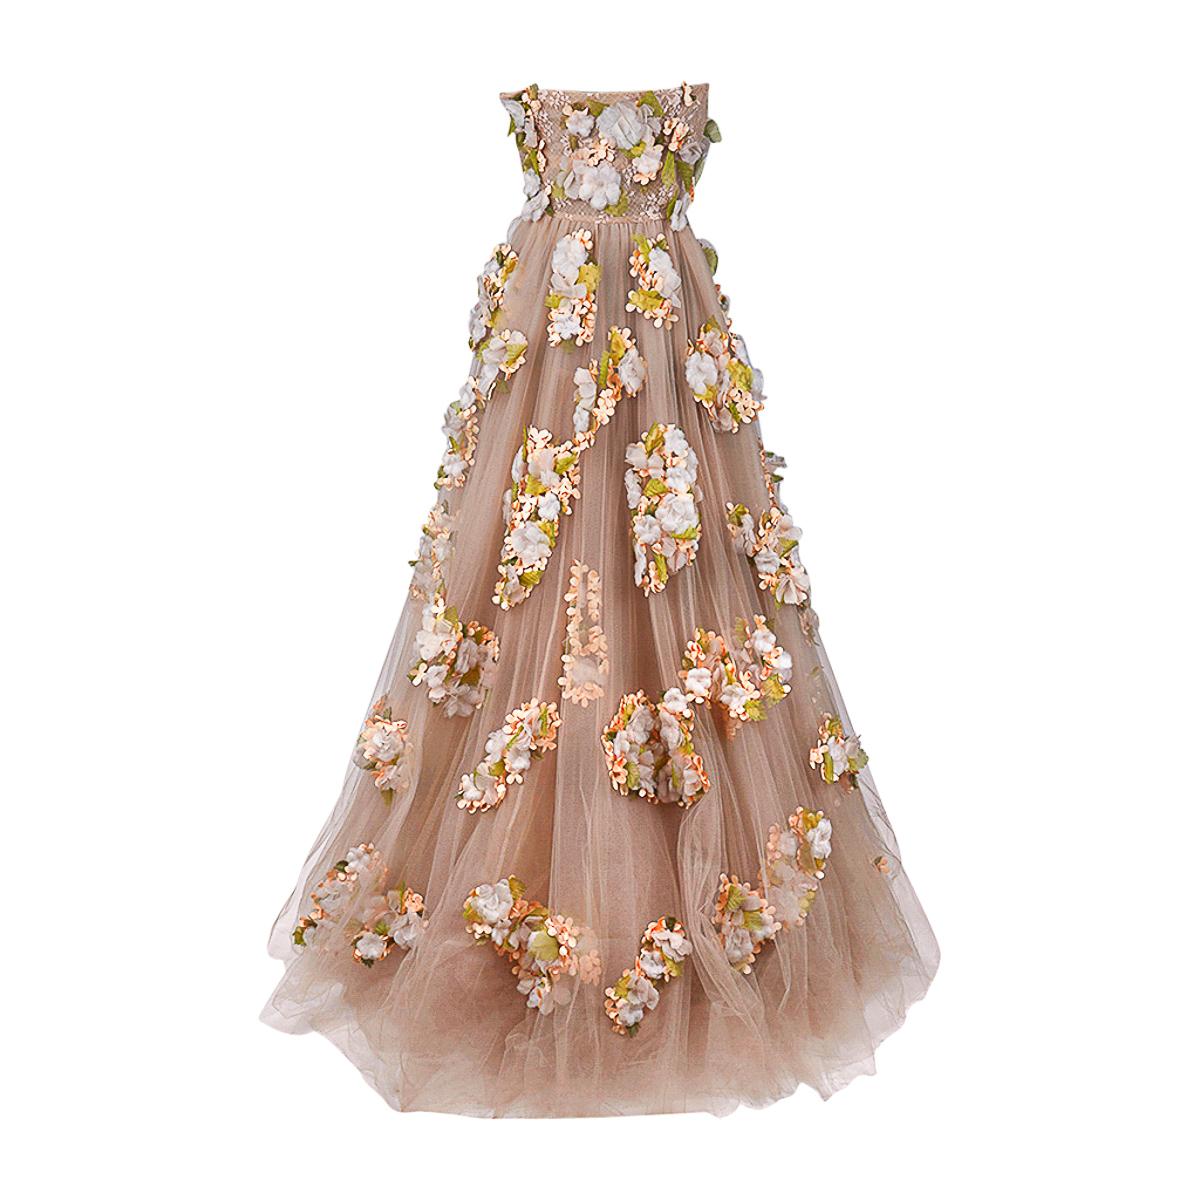 Valentino Strapless Empire Nude Flower Adorned Gown 1 of 2 Size 0 1